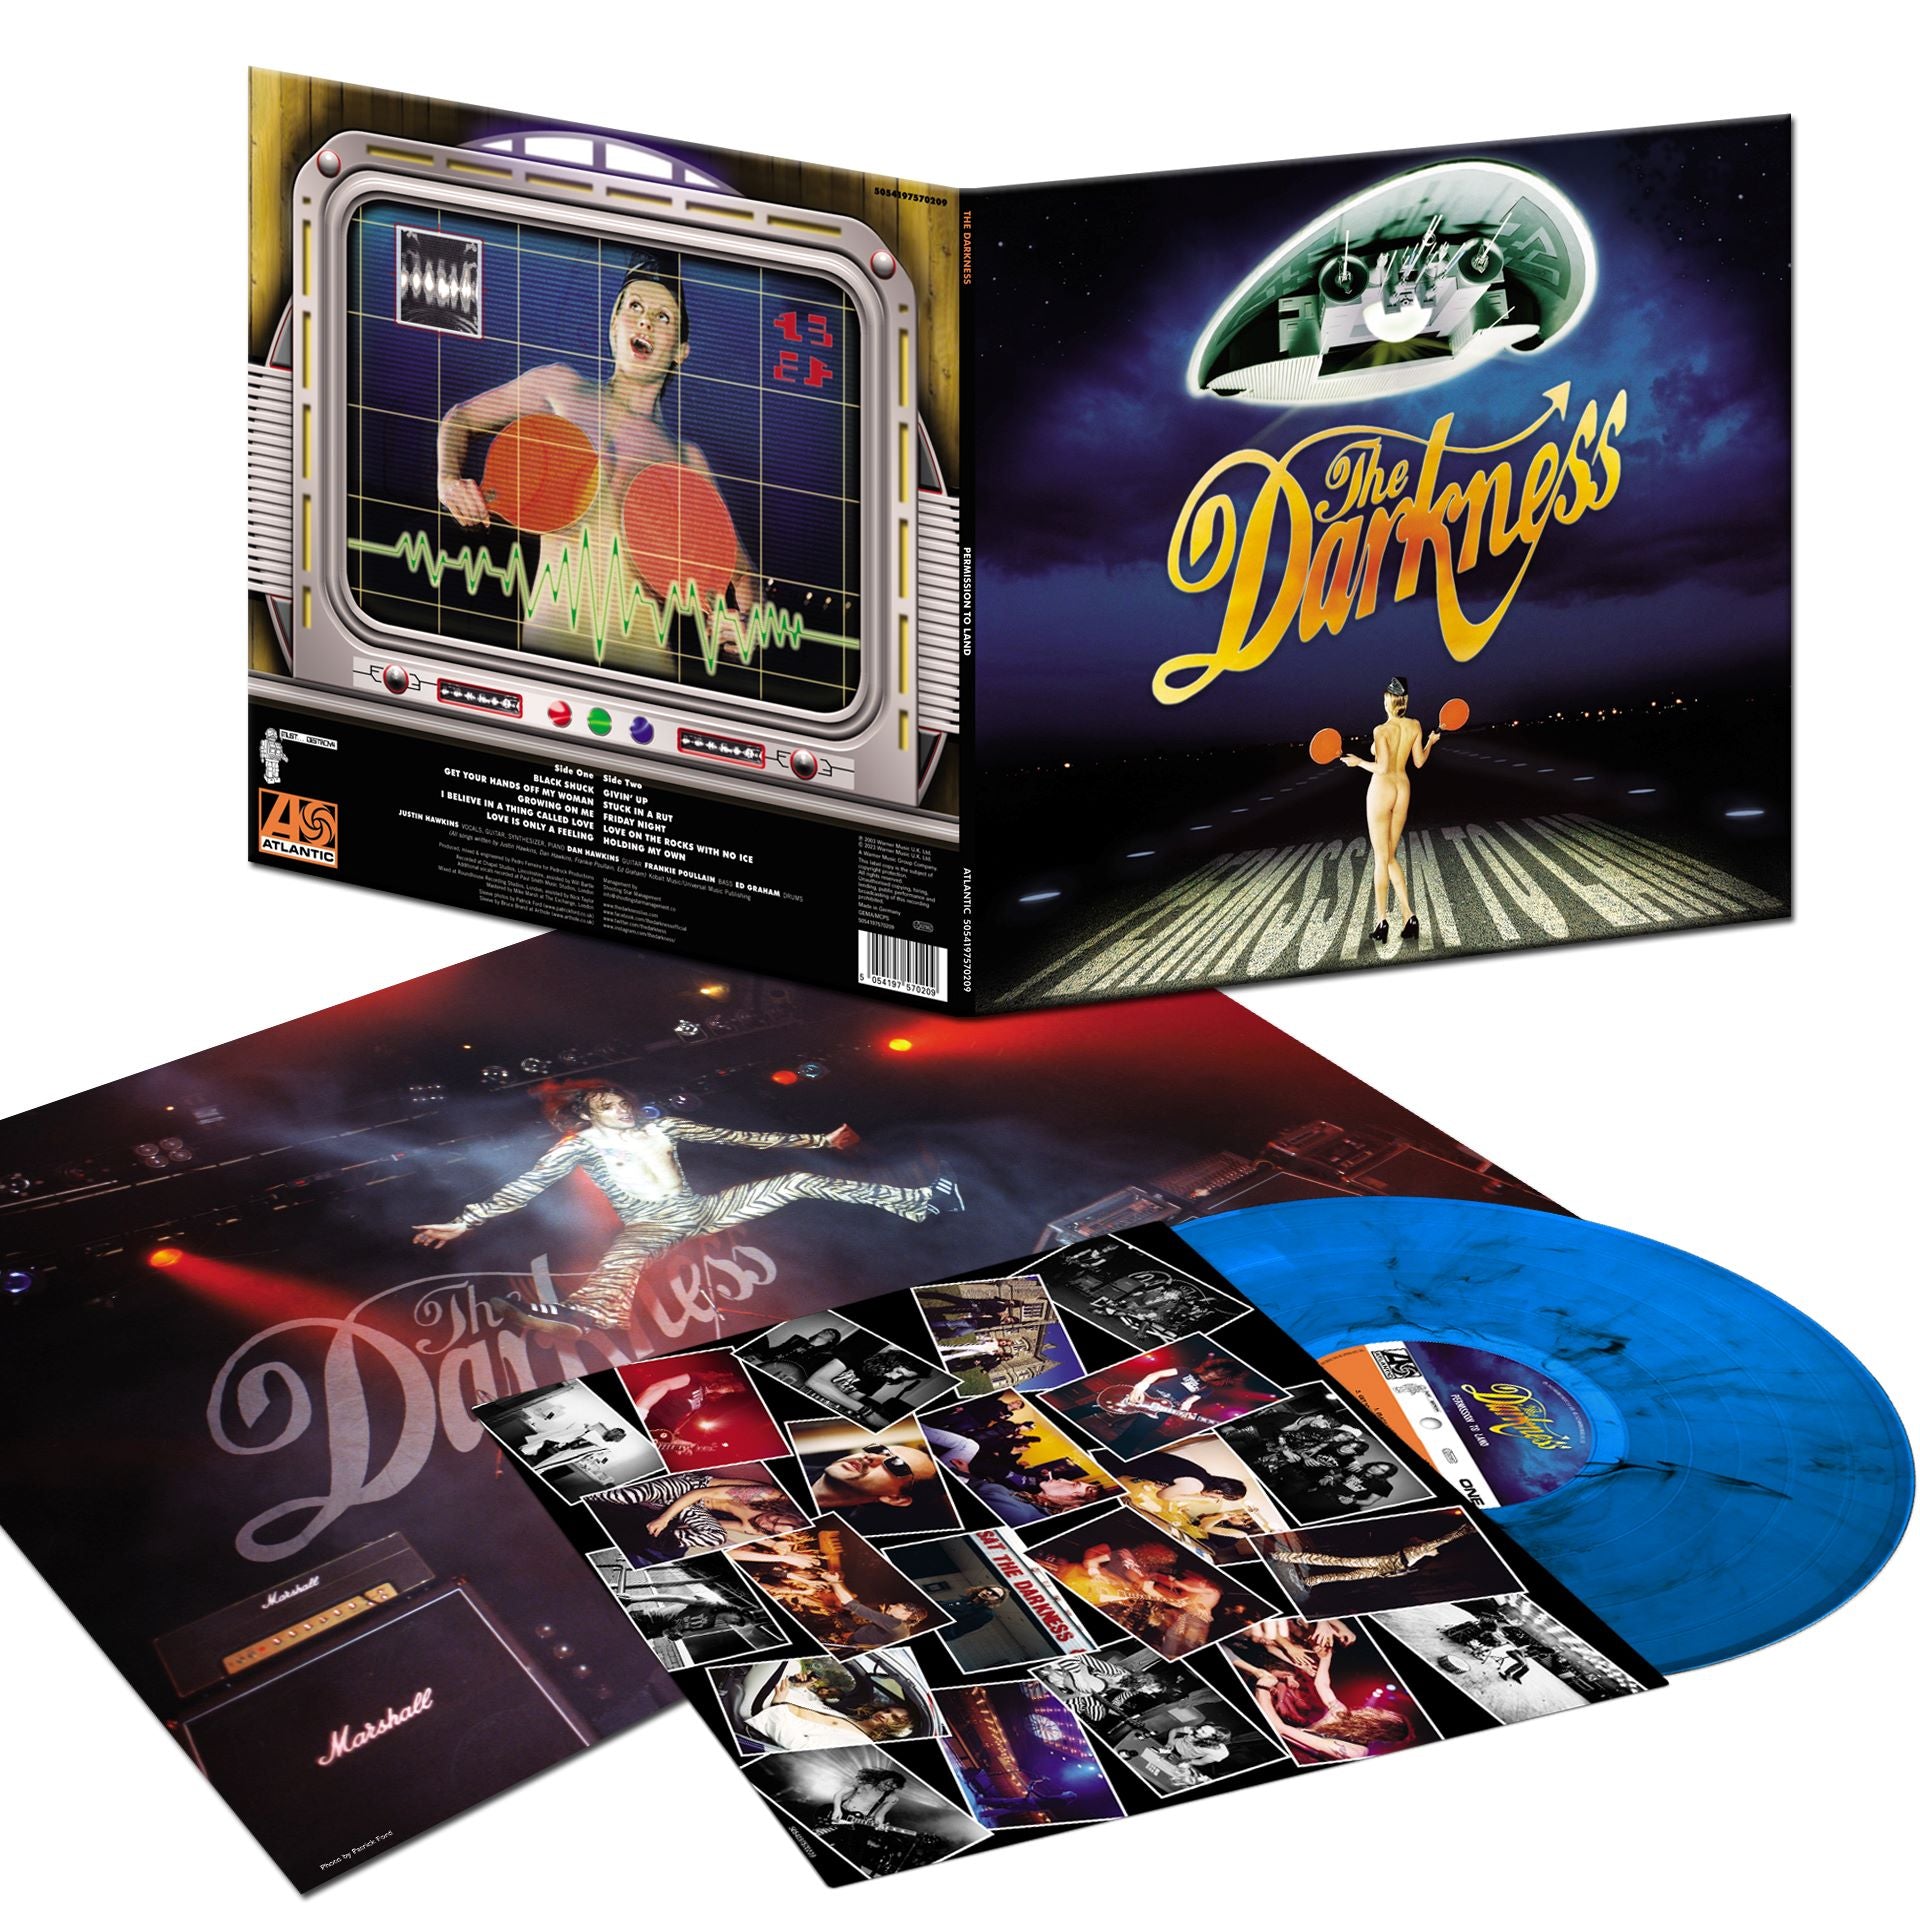 The Darkness - Permission To Land (20th Anniversary Edition): Limited Blue Marbled Vinyl LP